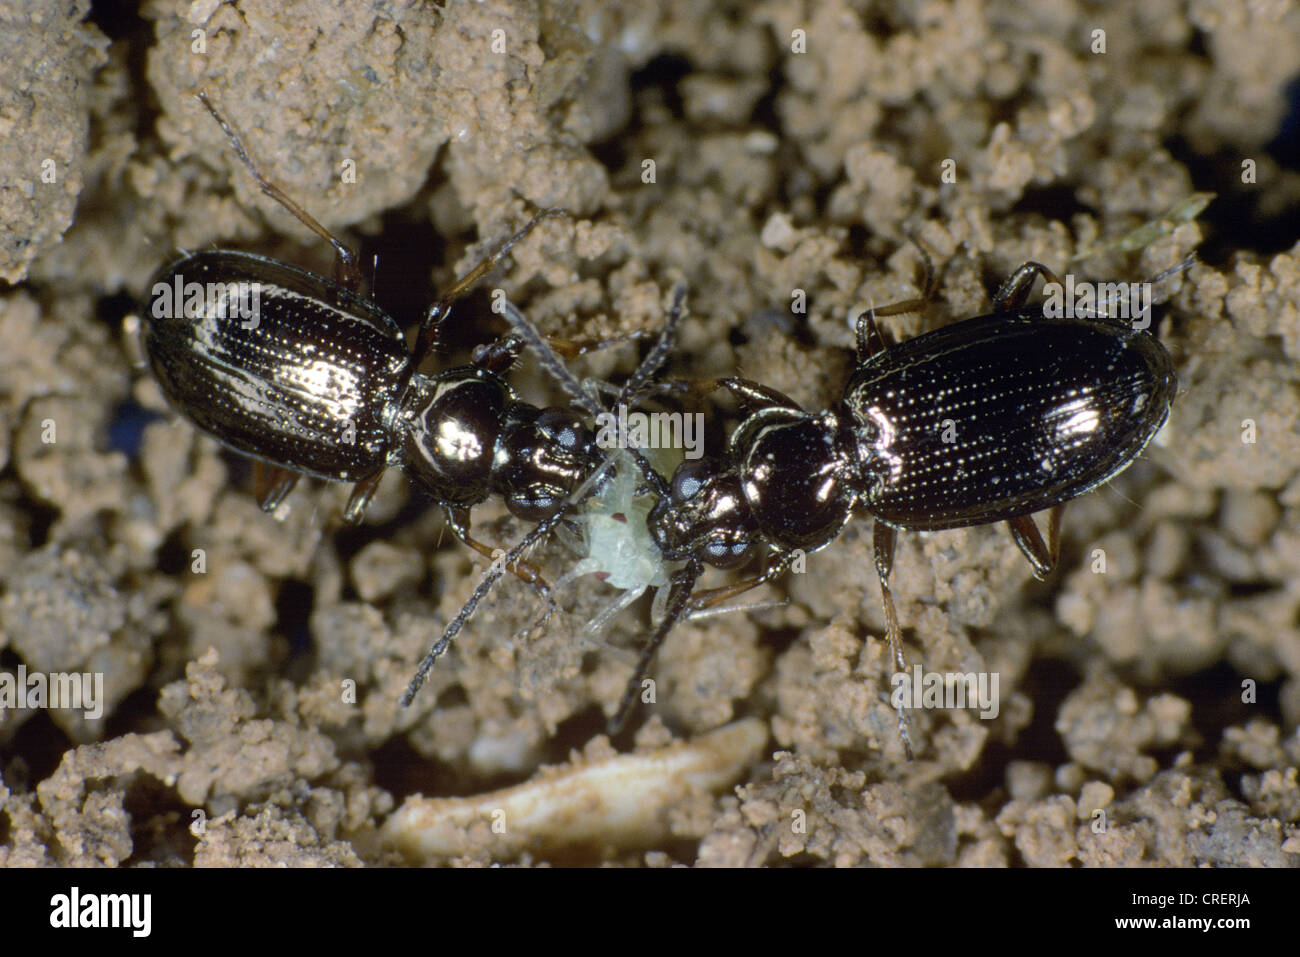 Two ground beetles Bembidion lampros fighting over aphid prey Stock Photo